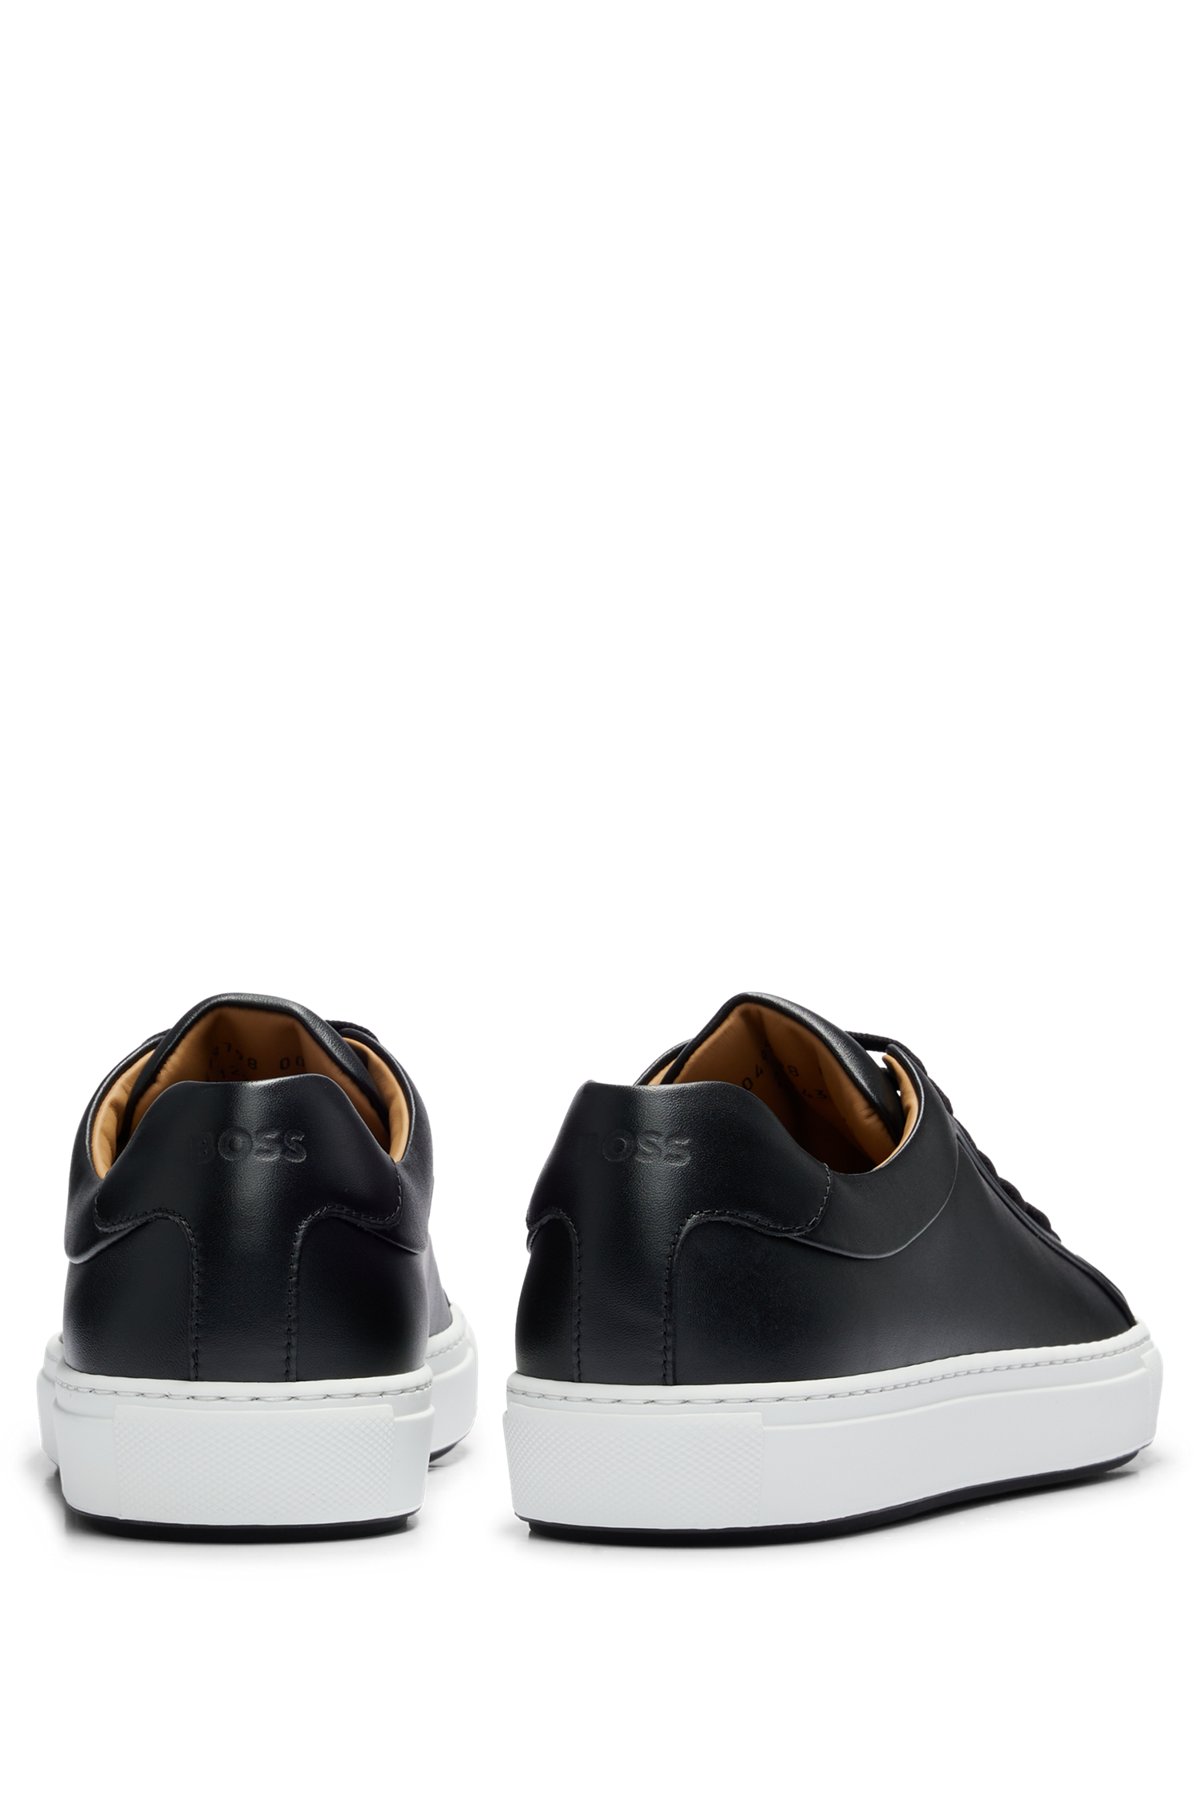 Lace-up trainers in leather with tonal branding, Black